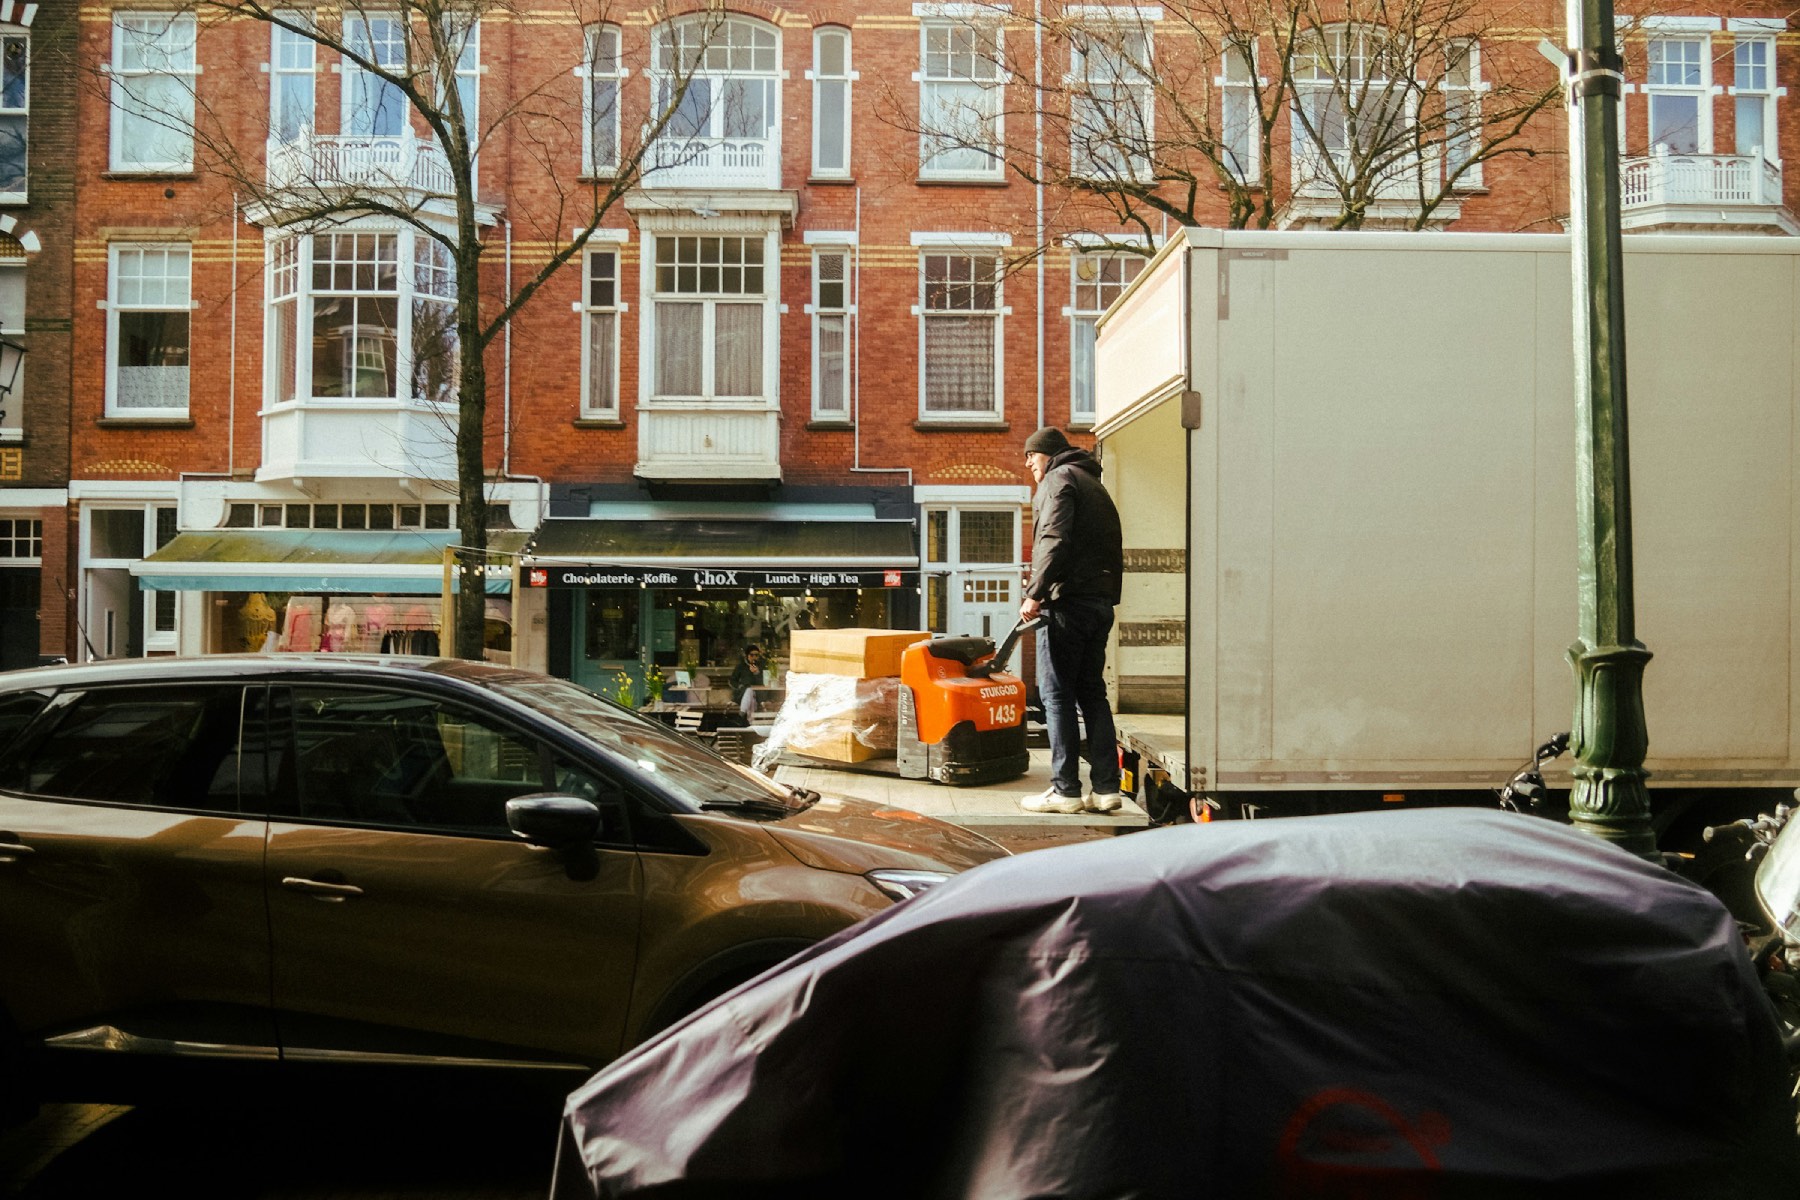 A man unloads boxes from a white moving van in Amsterdam next to moving traffic